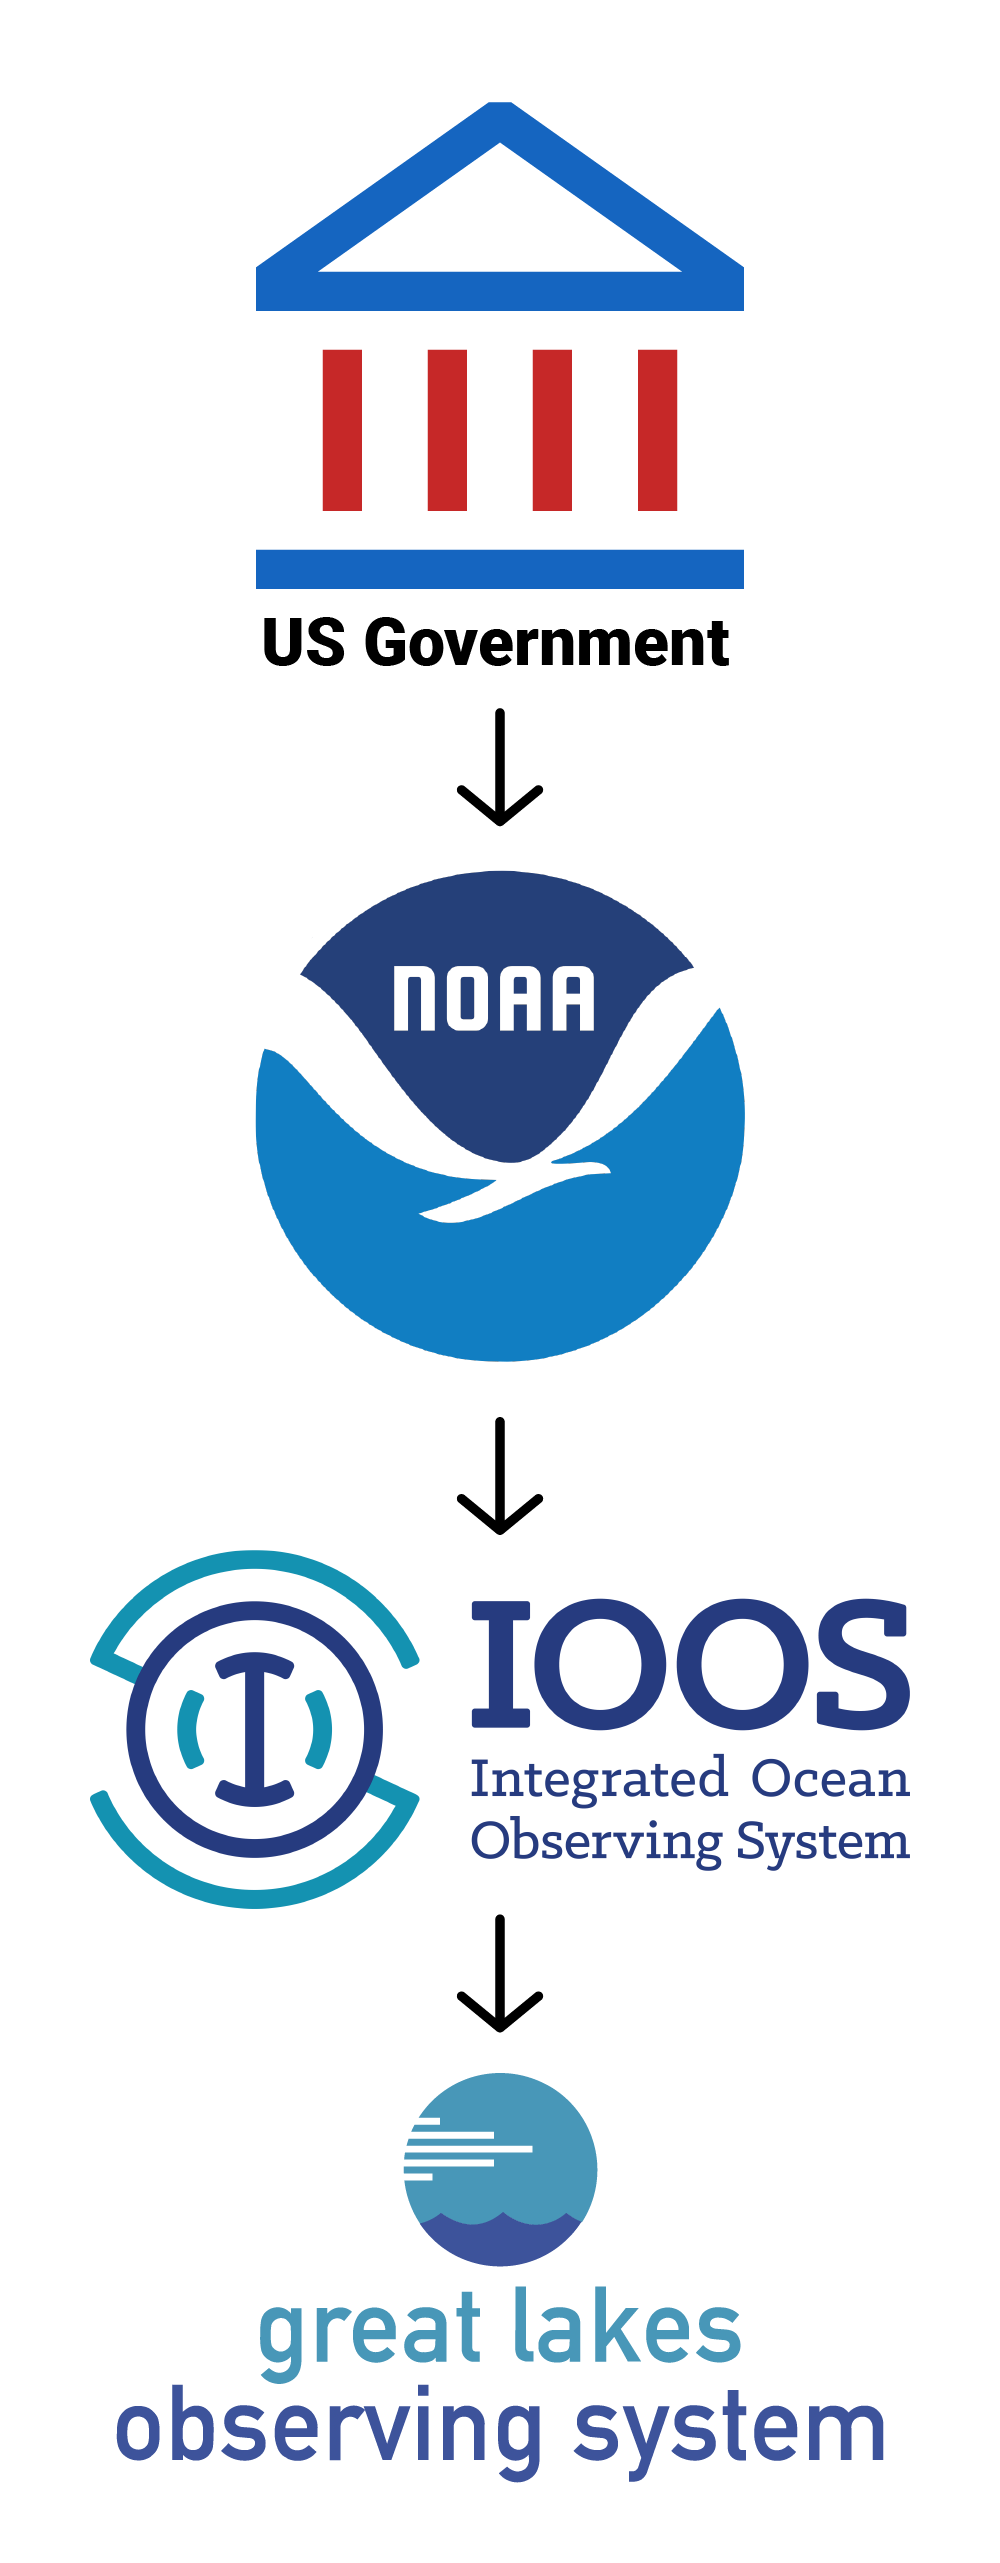 Four logos with arrows leading from one to the other: US Government, NOAA, Integrated Ocean Observing System, and the Great Lakes Observing System